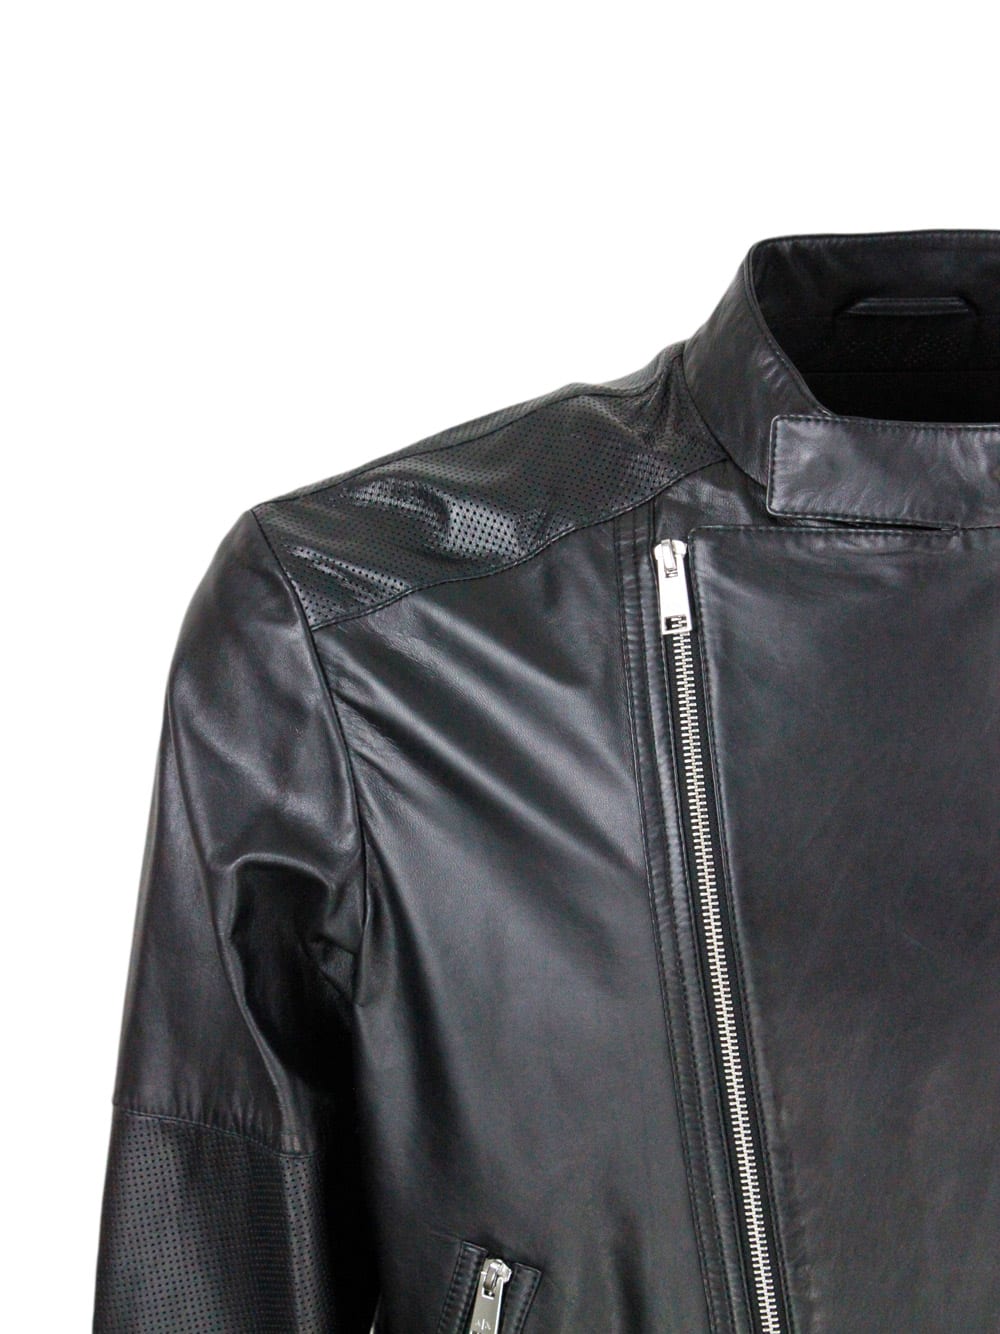 Shop Armani Collezioni Jacket With Zip Closure Made Of Soft Lambskin With Perforated Leather Details. Zip On Pockets And Cu In Black